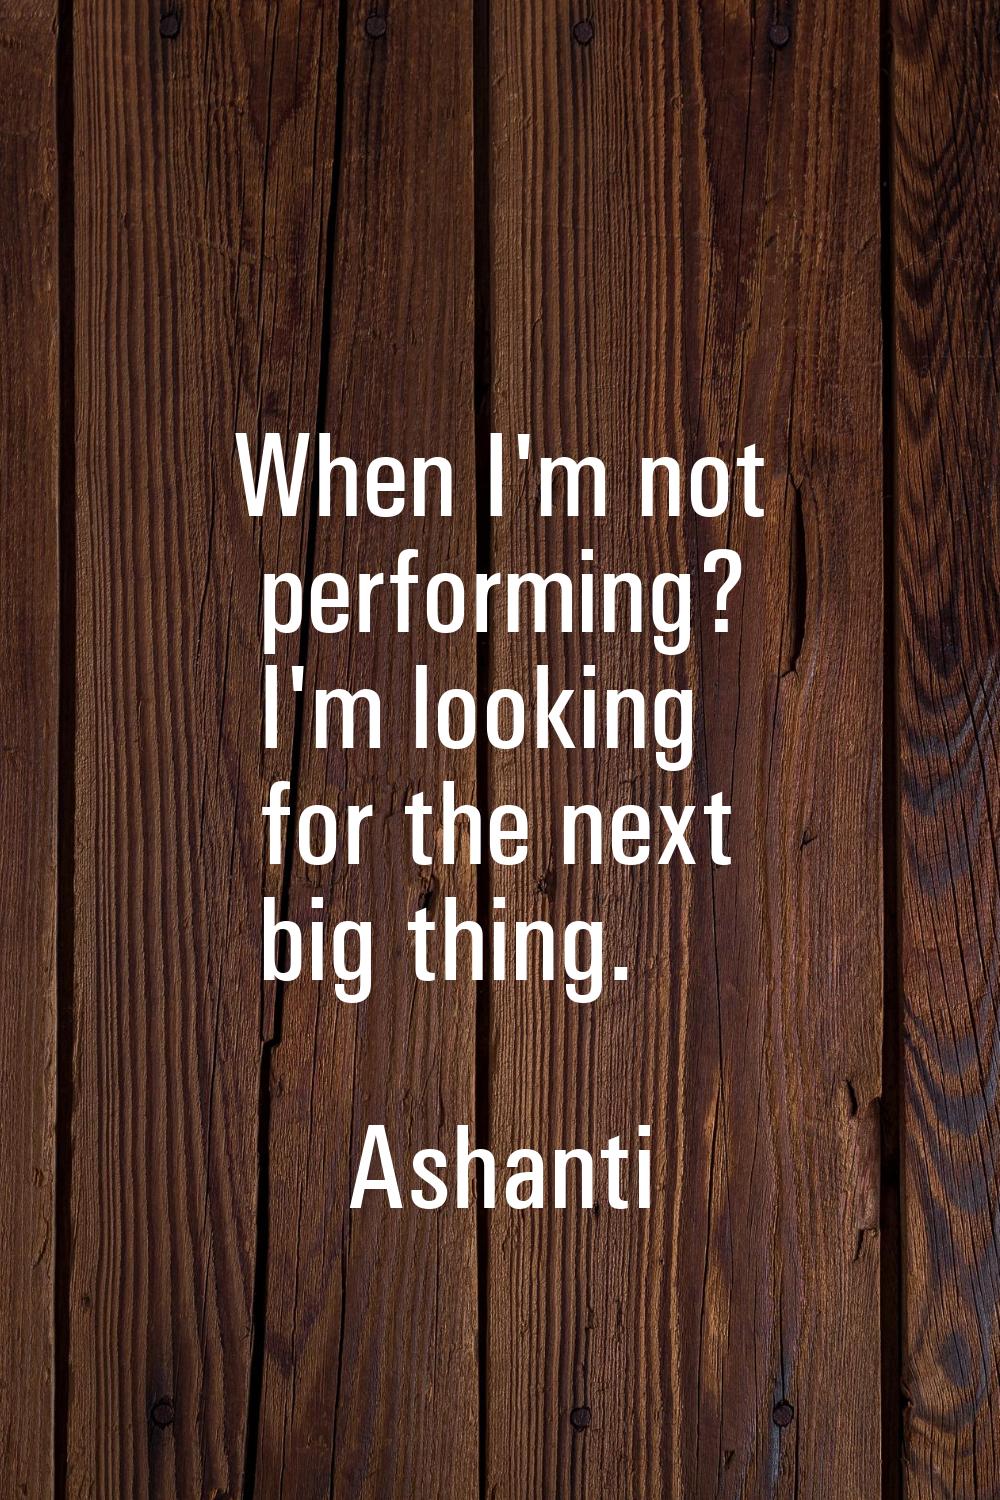 When I'm not performing? I'm looking for the next big thing.